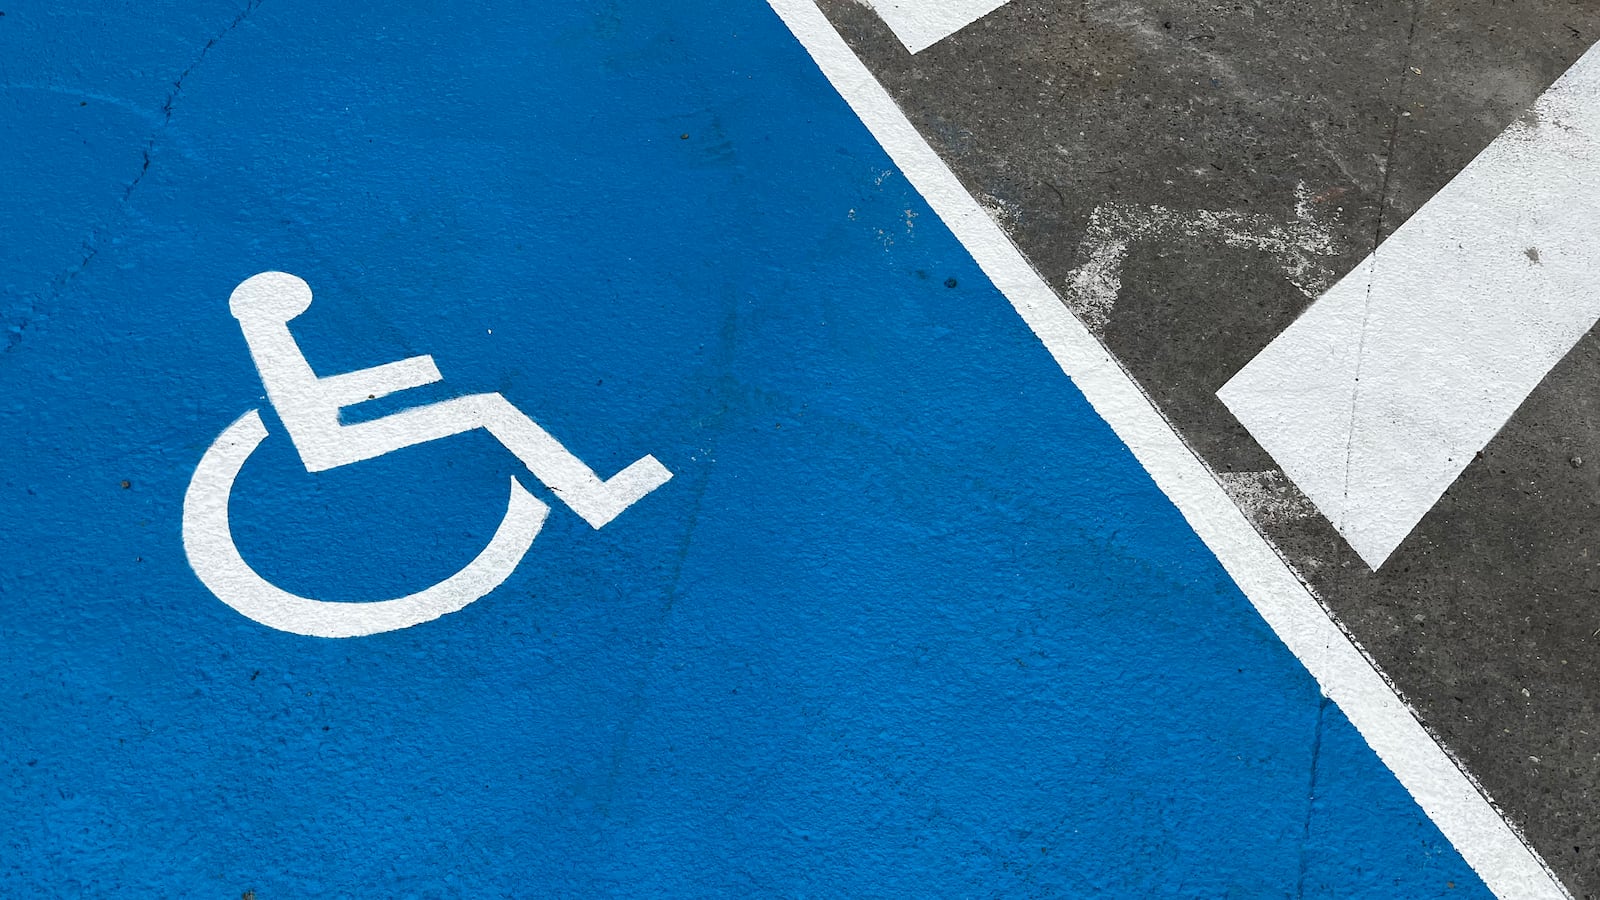 A white wheelchair icon on a painted blue parking space.